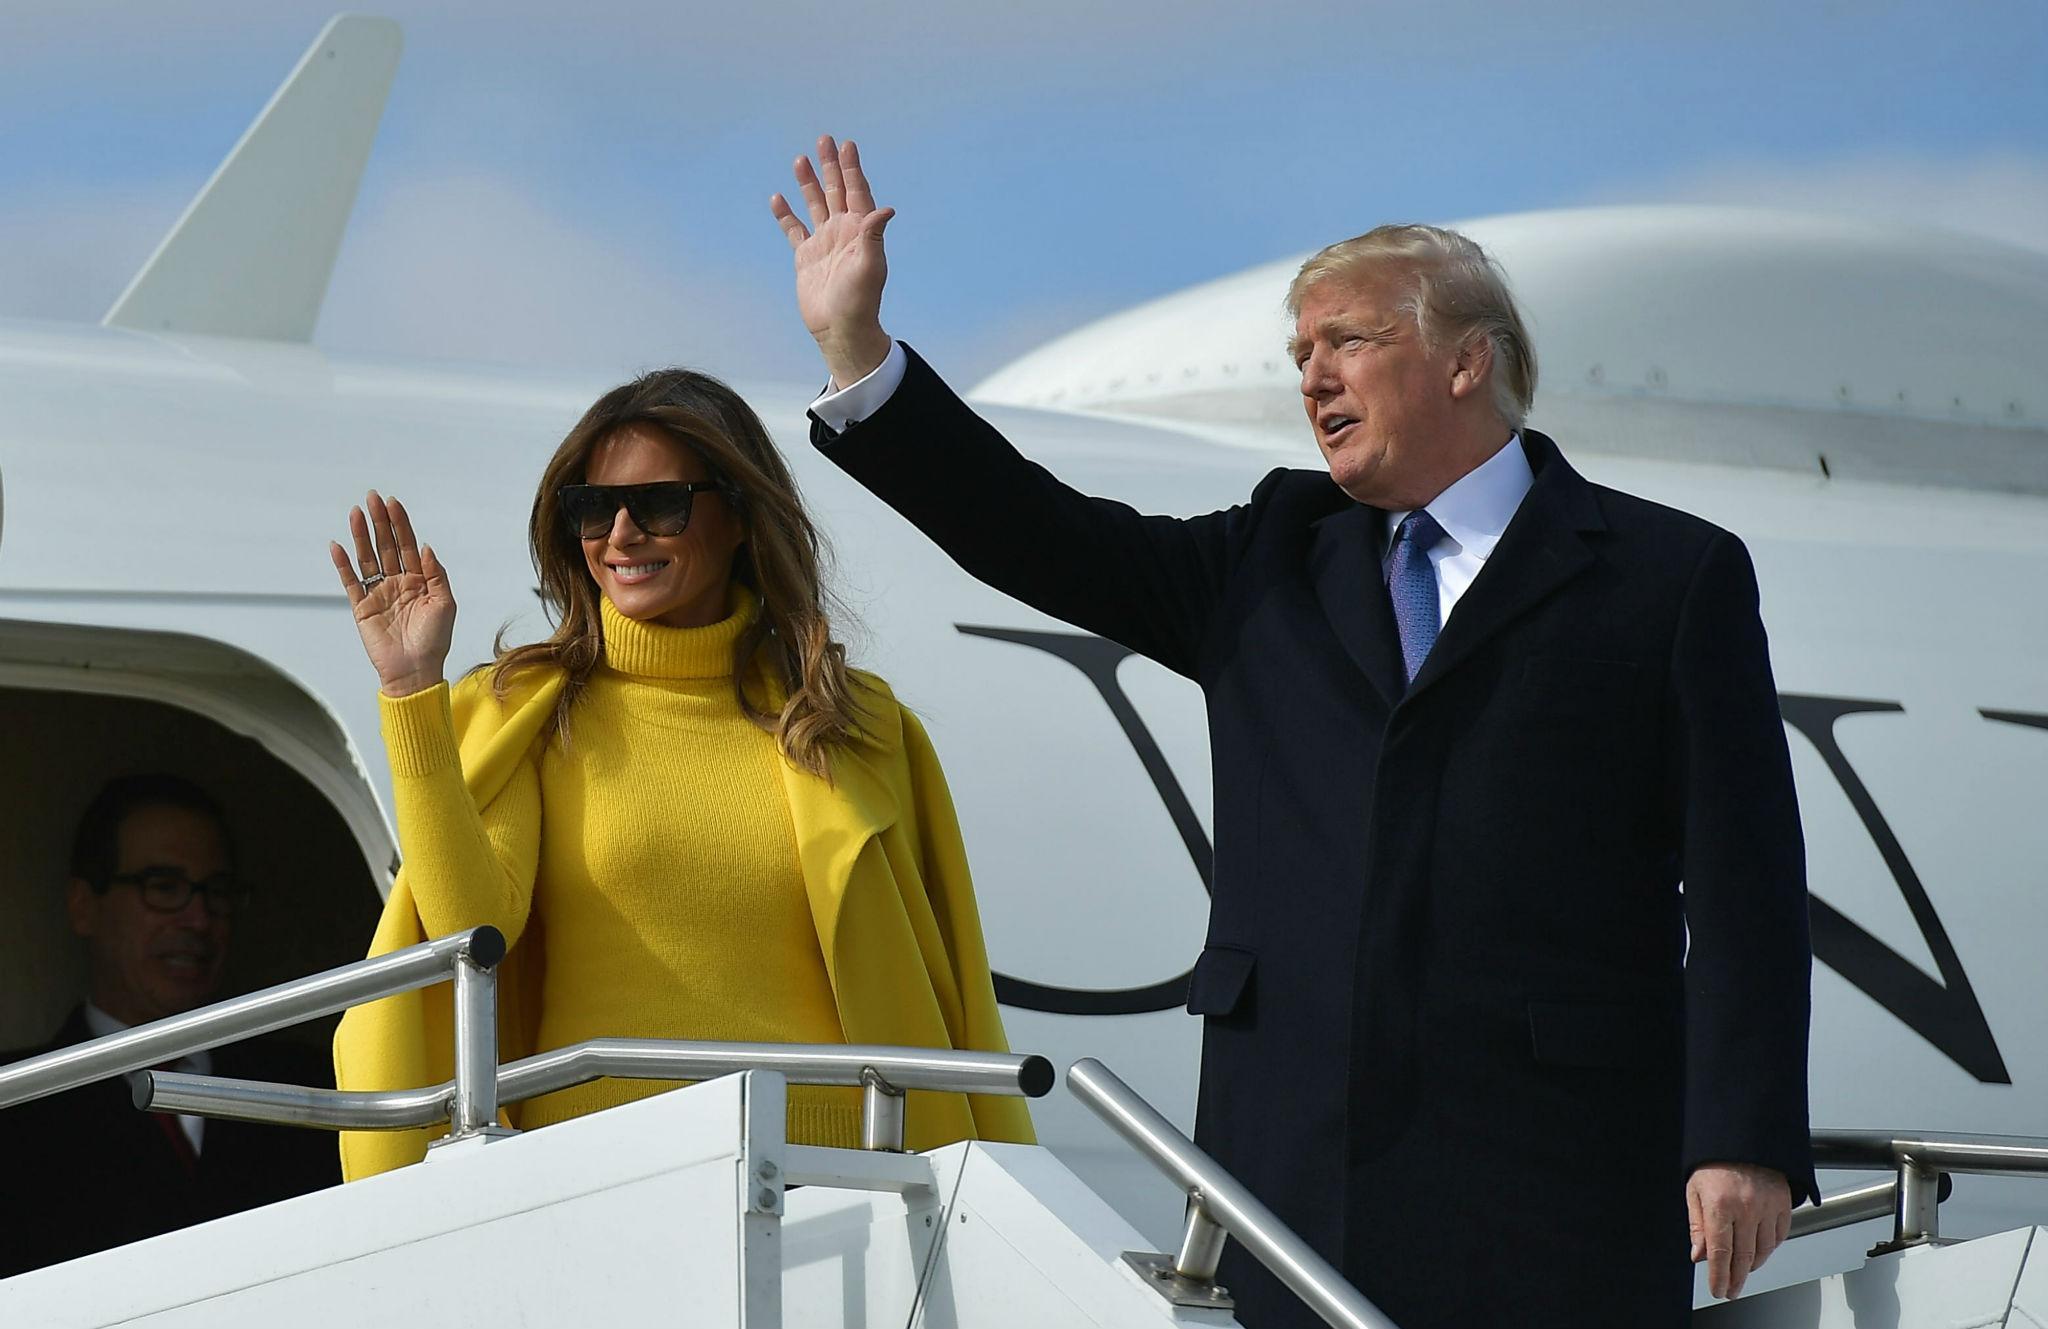 Donald Trump claims he got a $1m discount on Melania Trump's engagement ring